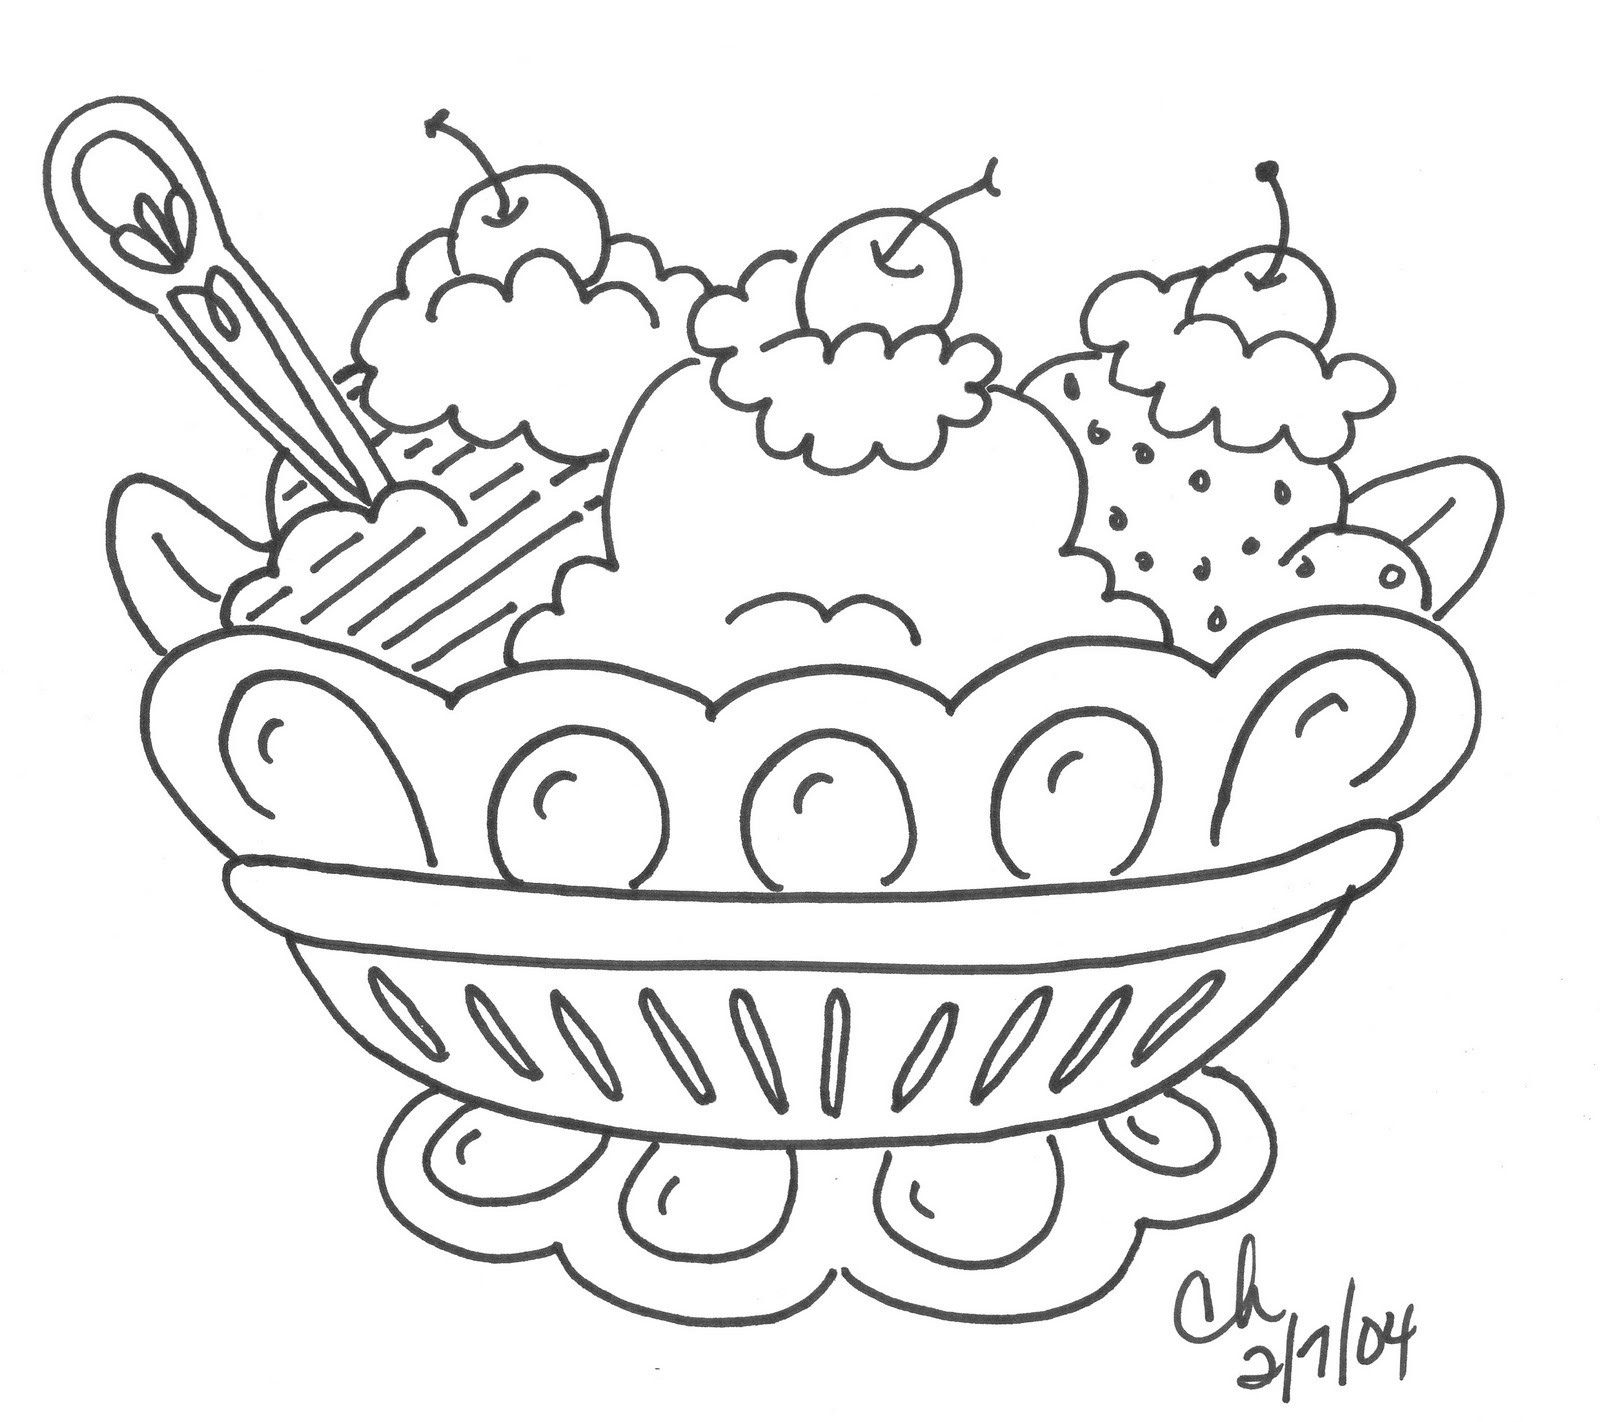 Three Ice Cream Scoops Coloring Page (Page 1) - Line.17QQ.com